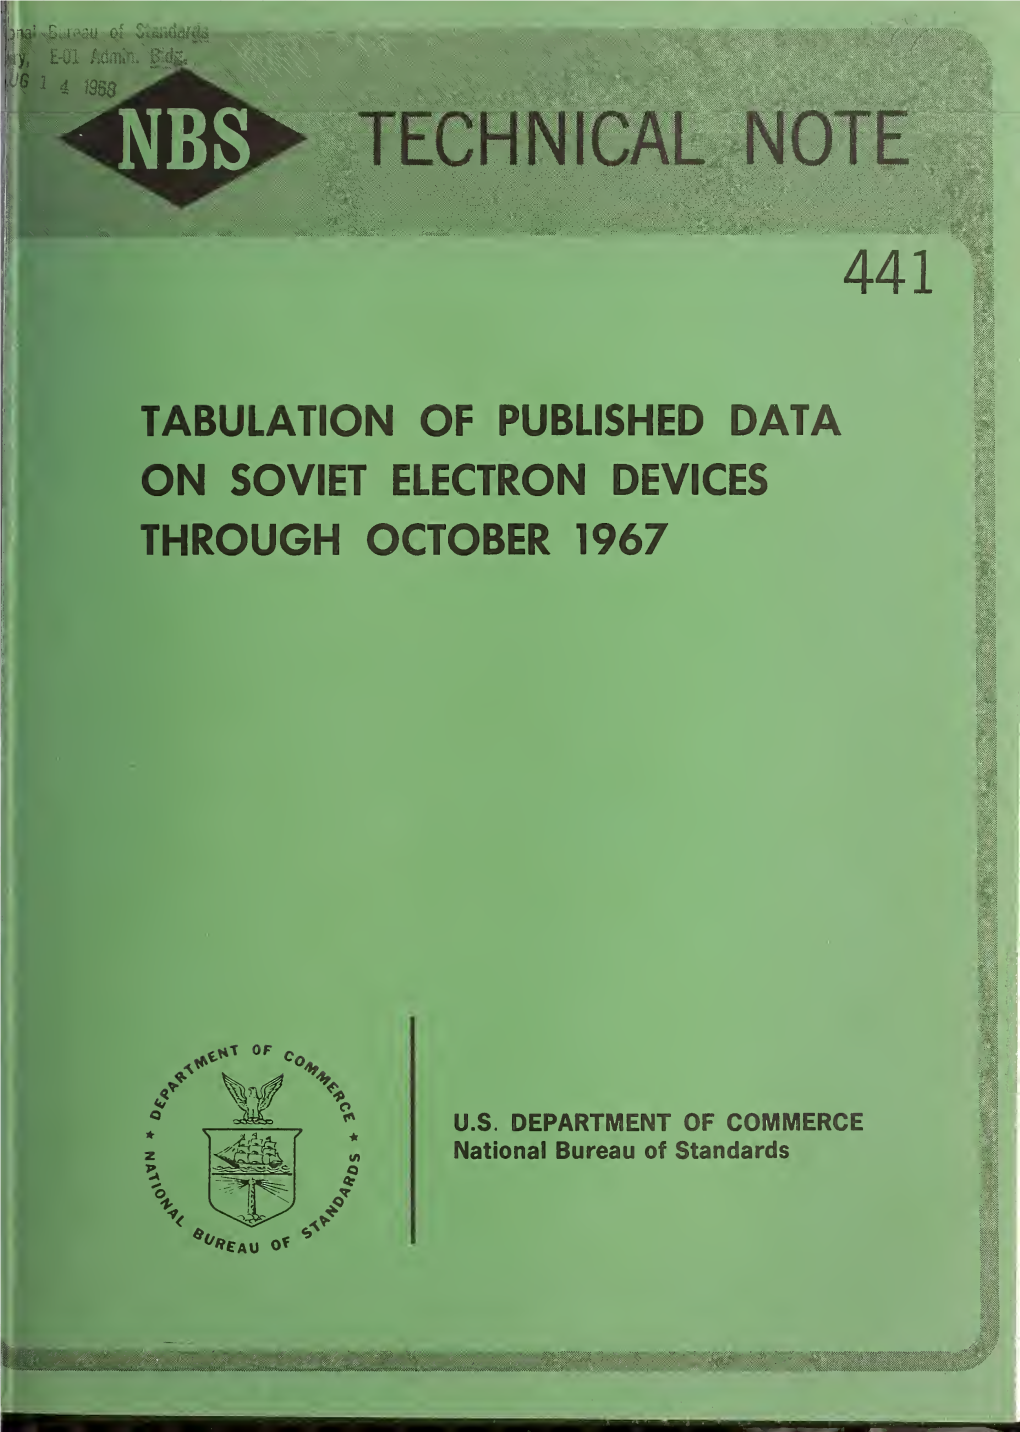 Tabulation of Published Data on Soviet Electron Devices Through October 1967